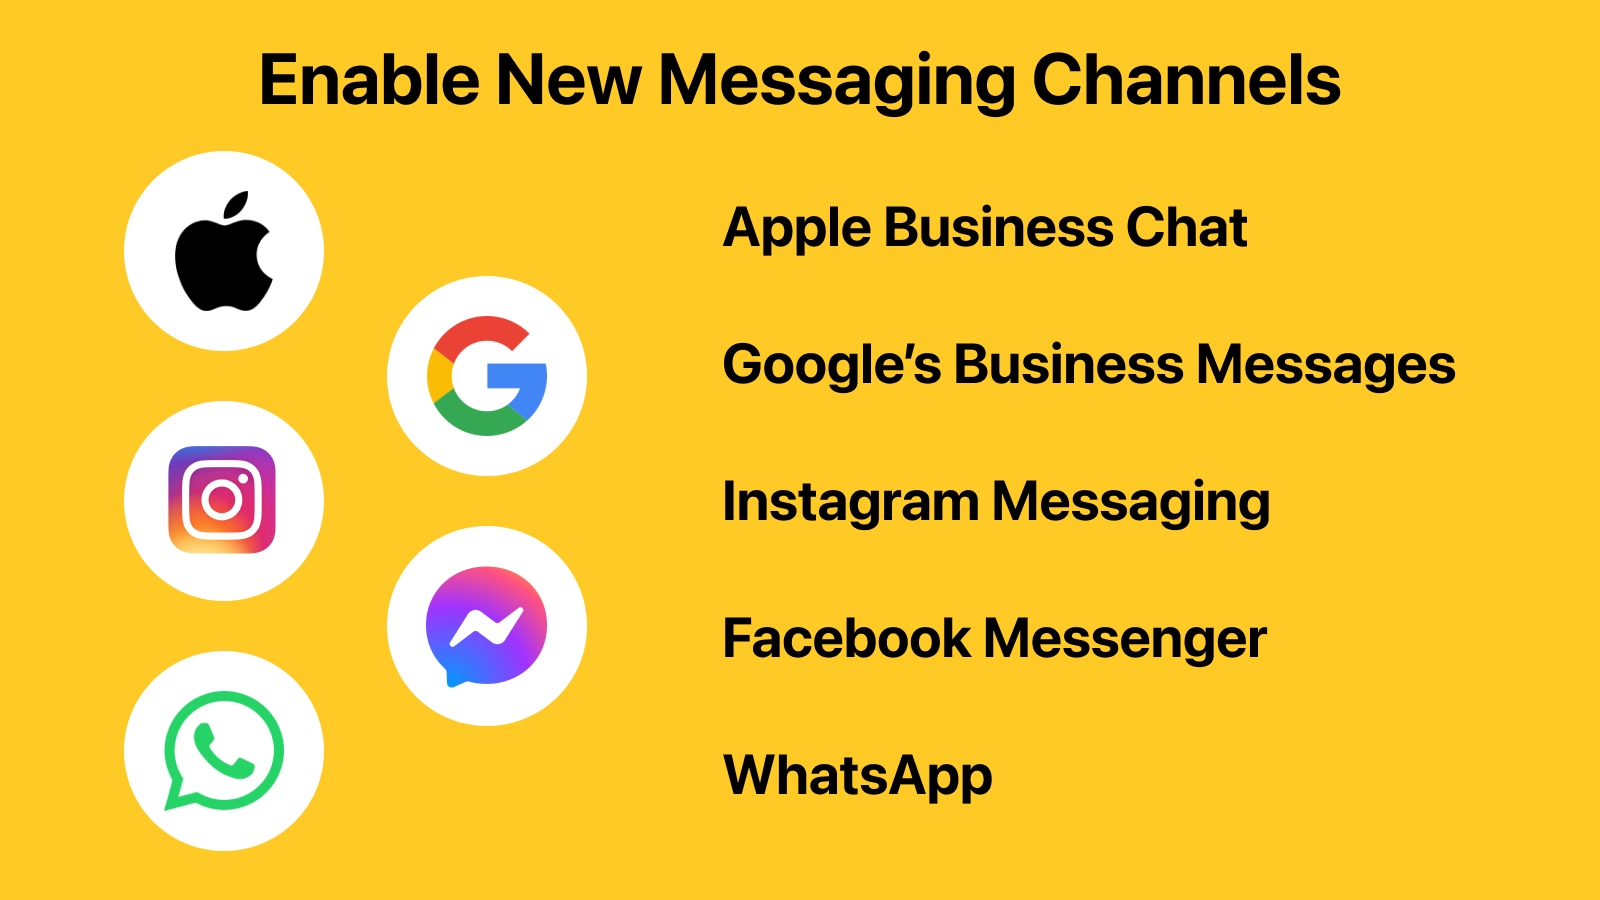 Enable New Messaging Channels